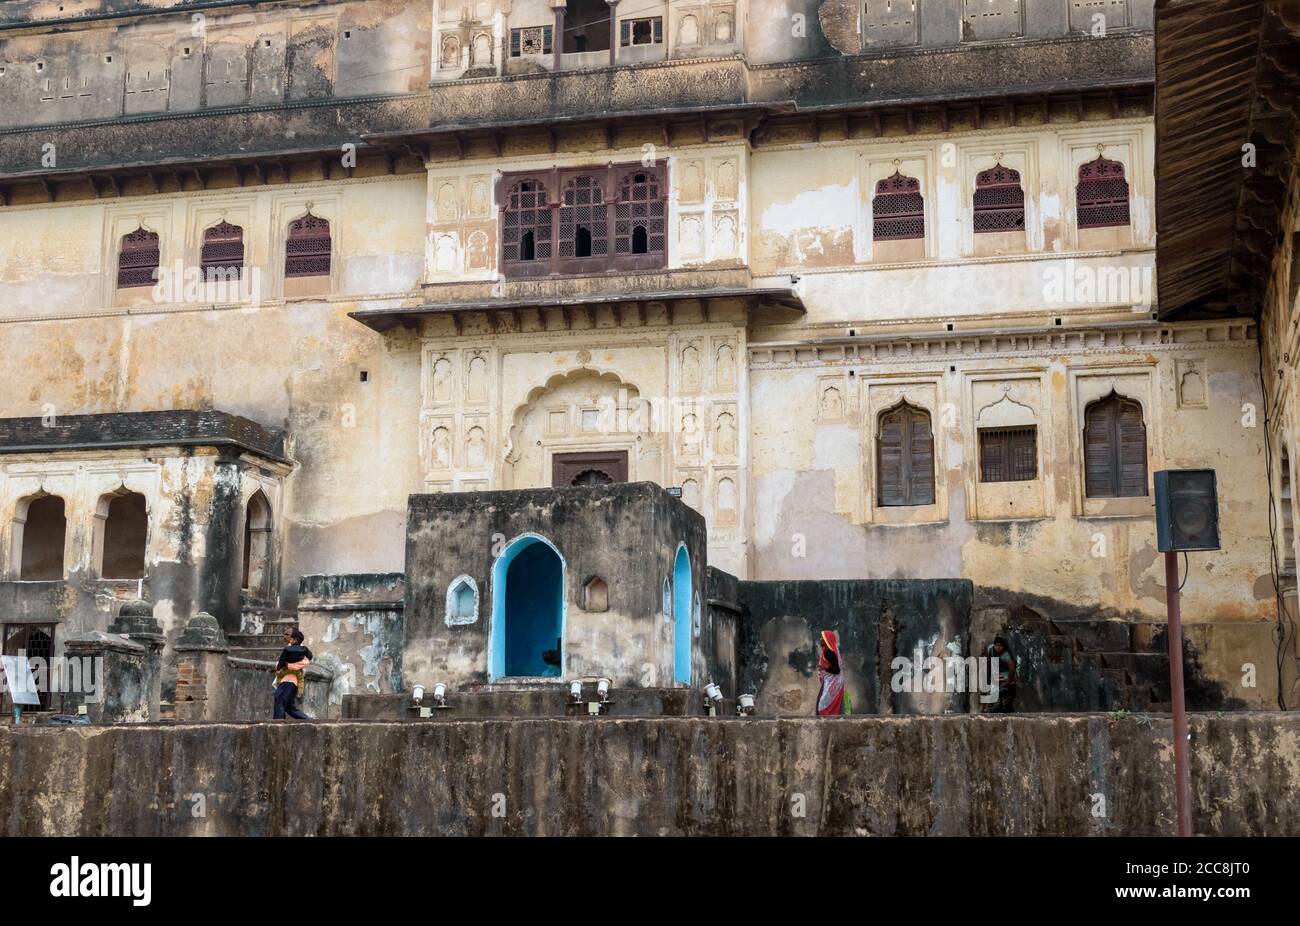 Orchha, Madhya Pradesh/India - March 14 2019: View of the architectural details and the multi-storeyed windowed walls of Raja Mahal. Stock Photo